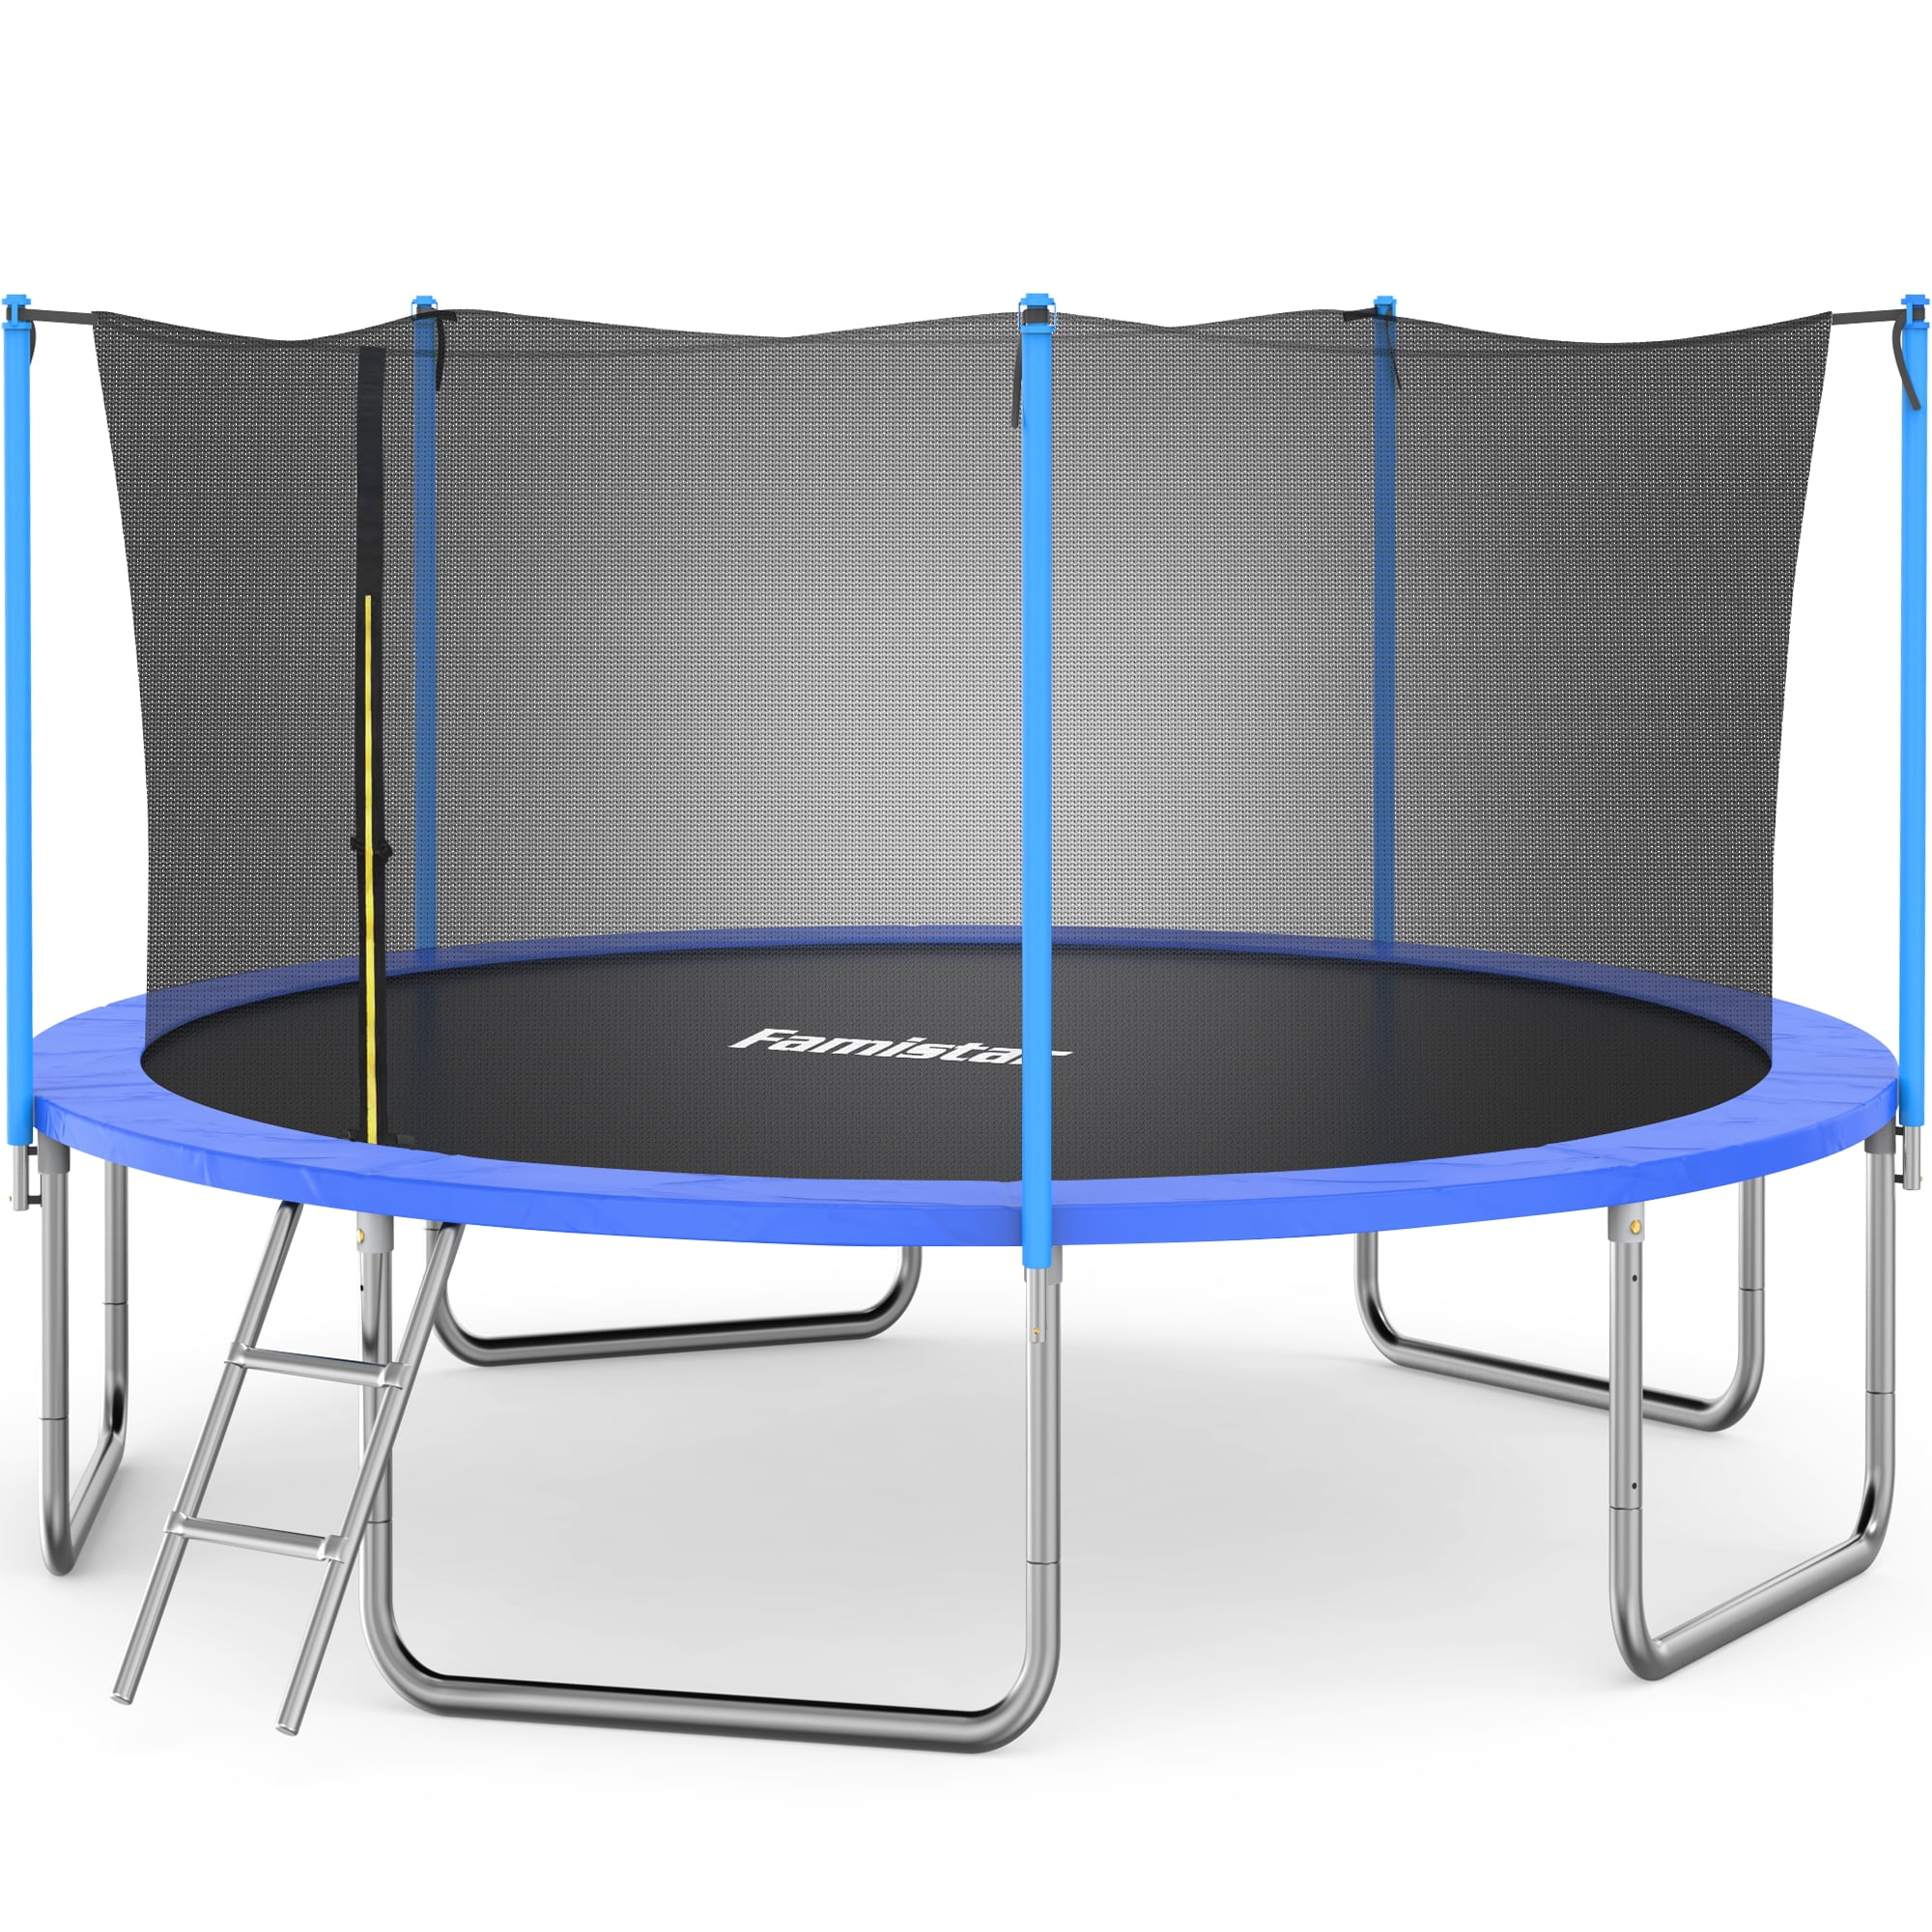 Famistar 15FT Trampoline, Recreational Trampoline with Safety Enclosure ...